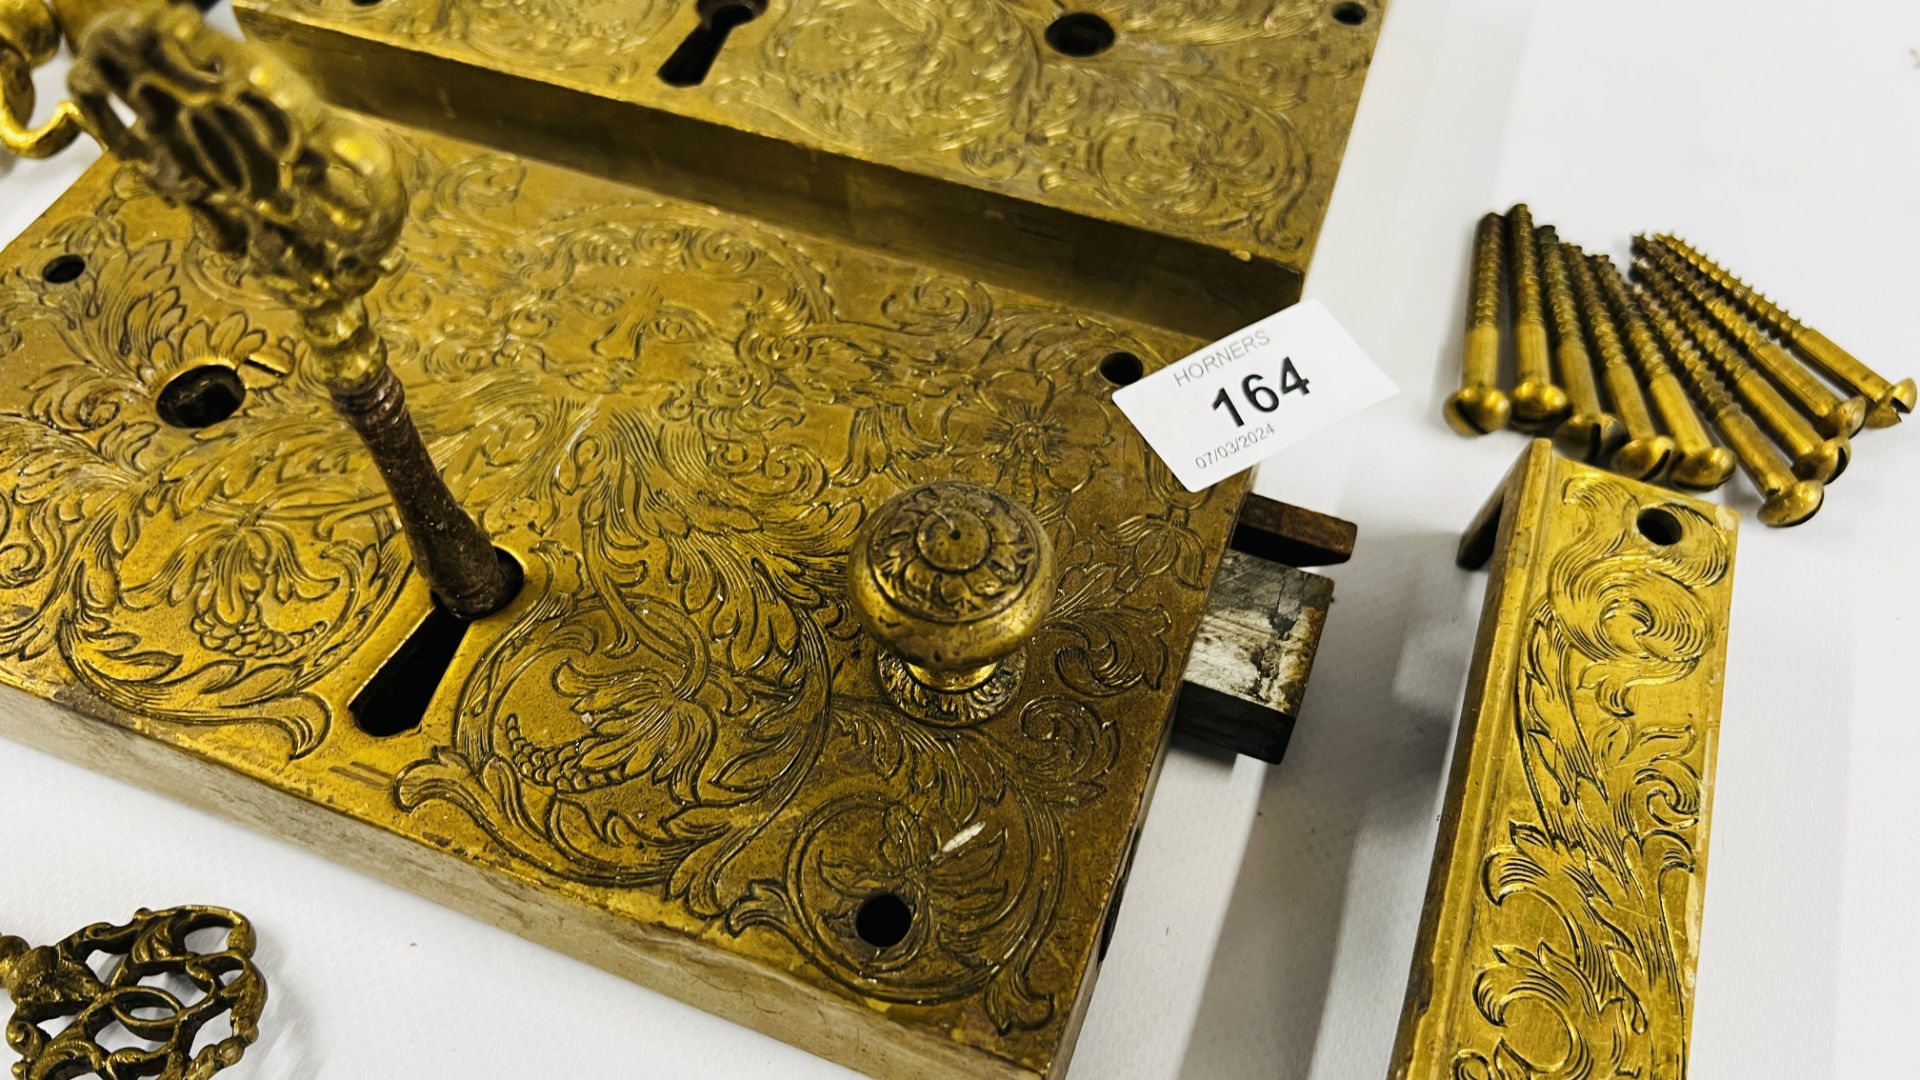 A PAIR OF ELABORATE ANTIQUE SOLID BRASS DOOR LOCKS PROBABLY C18th RETAINING THE ORIGINAL KEYS, - Image 8 of 12